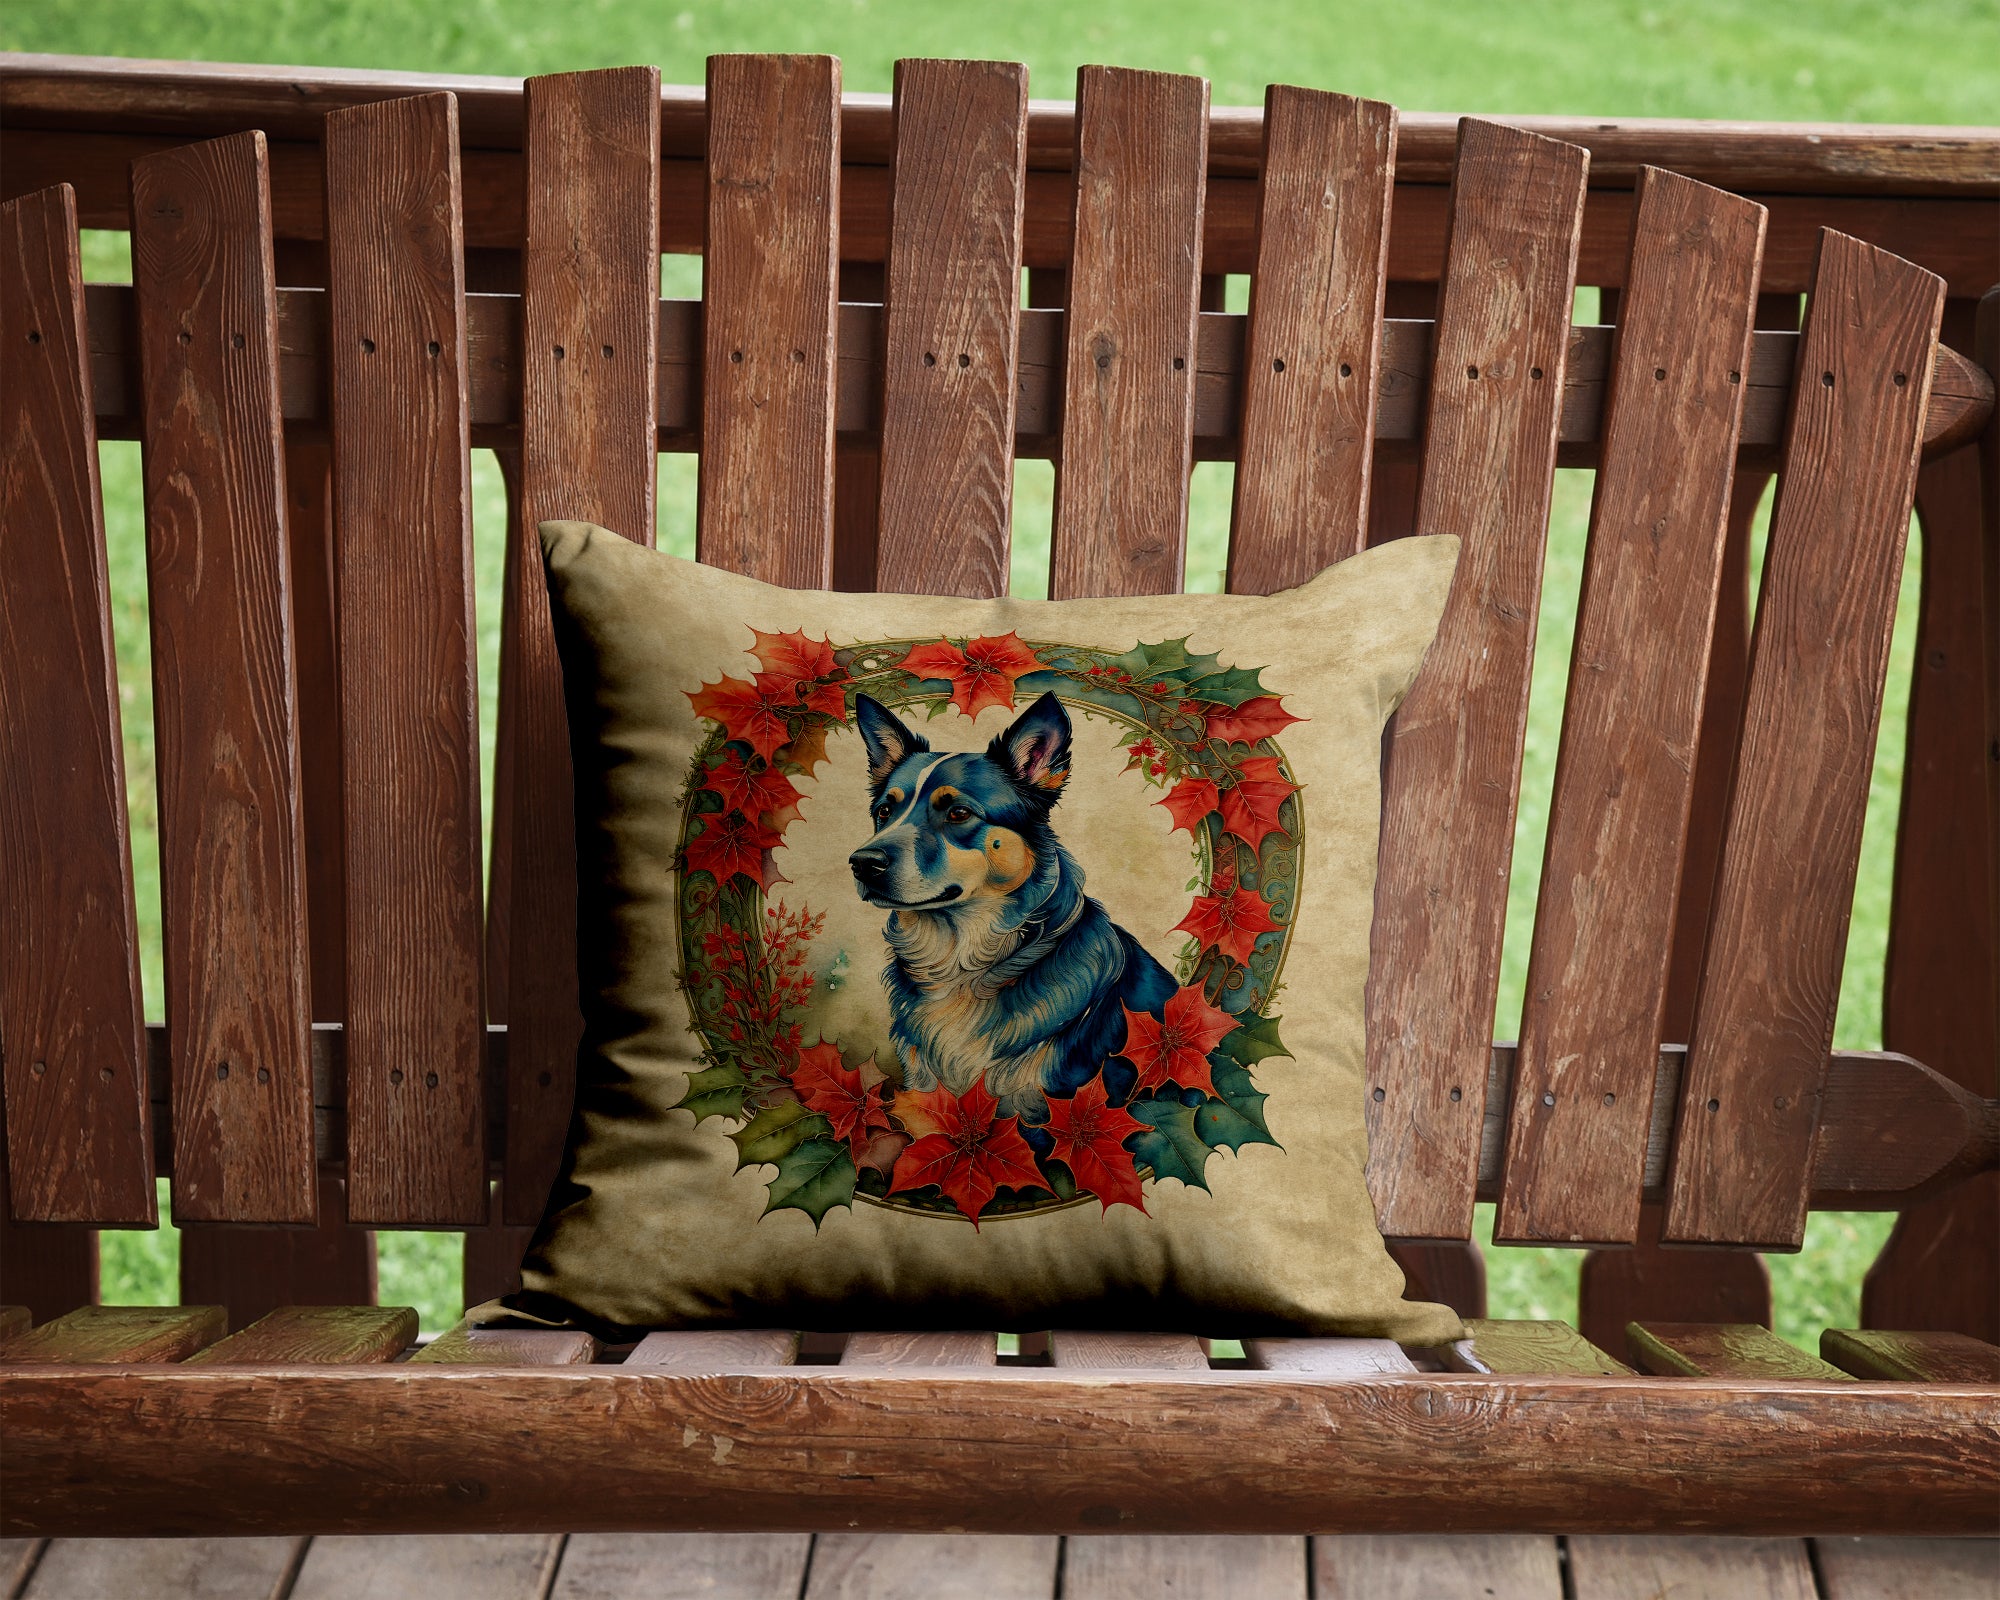 Buy this Australian Cattle Dog Christmas Flowers Throw Pillow